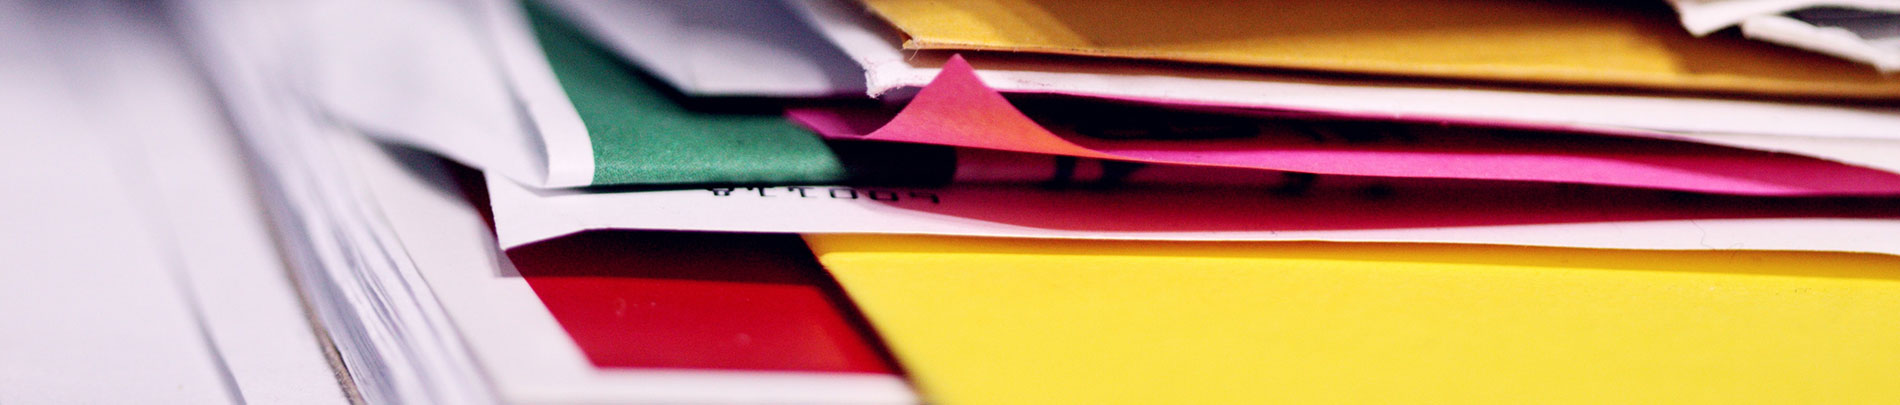 A stack of different coloured papers and reports.